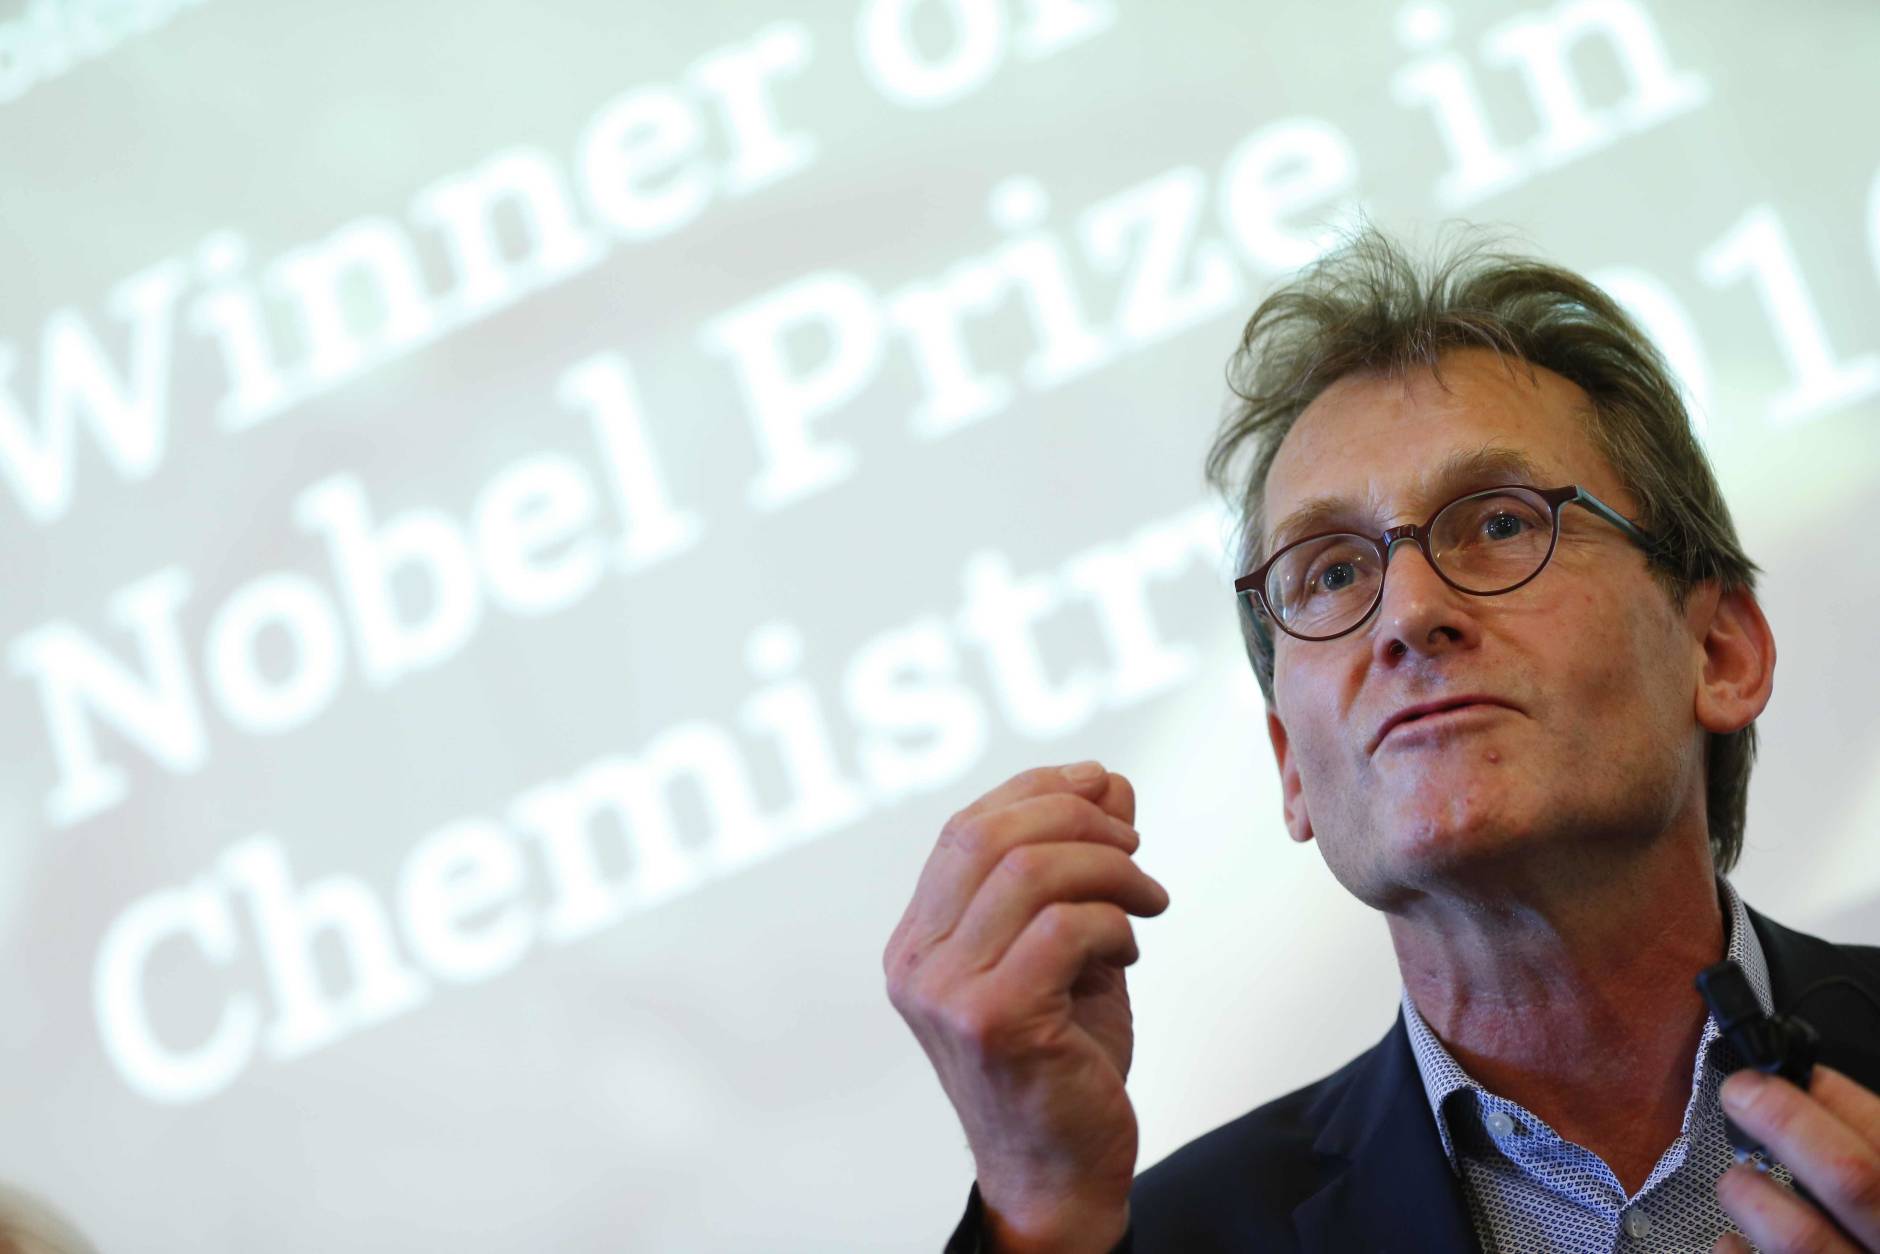 Dutch scientist  Bernard "Ben" Feringa gestures as he speaks during a press conference at the University of Groningen in the Netherlands, Wednesday Oct. 5, 2016 Feringa was one of  the three scientists who won the Nobel Prize in chemistry on Wednesday for developing the world's smallest machines, work that could revolutionise computer technology and lead to a new type of battery. (AP Photo/Peter Dejong)